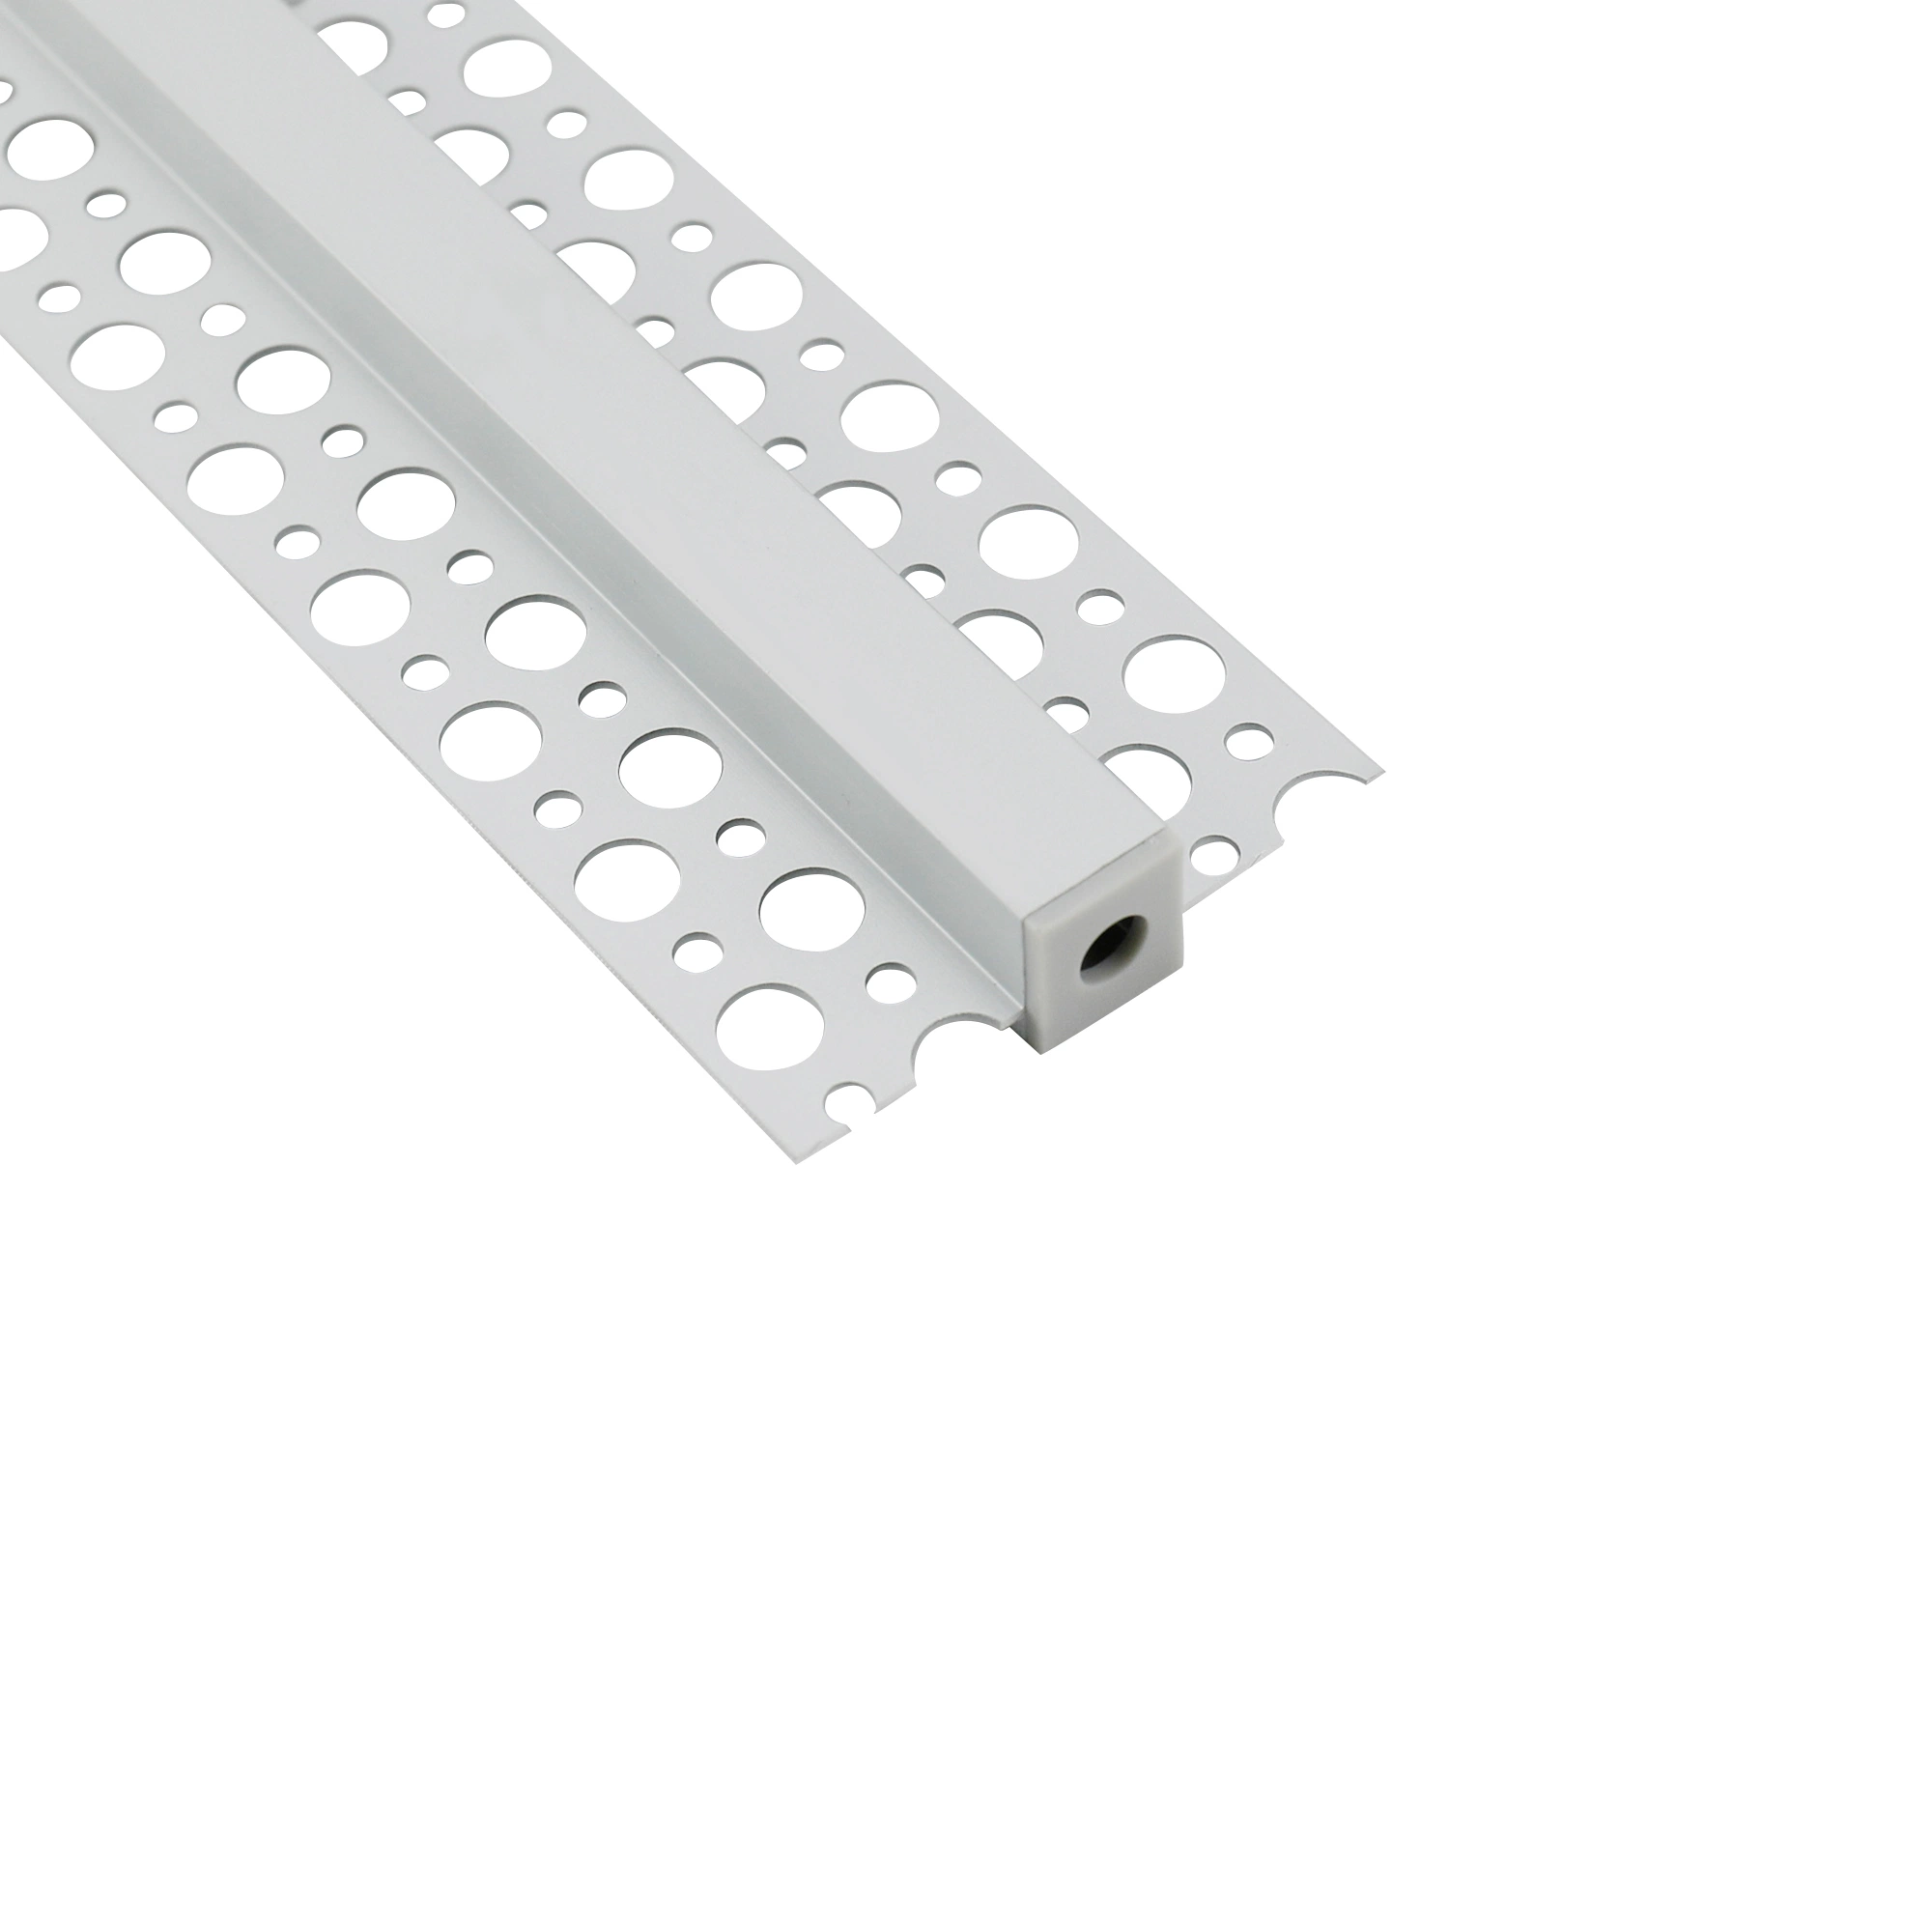 Trimless Ceiling Wall Recessed Plaster in LED Profile Architectural Lighting LED Profile Light Aluminum